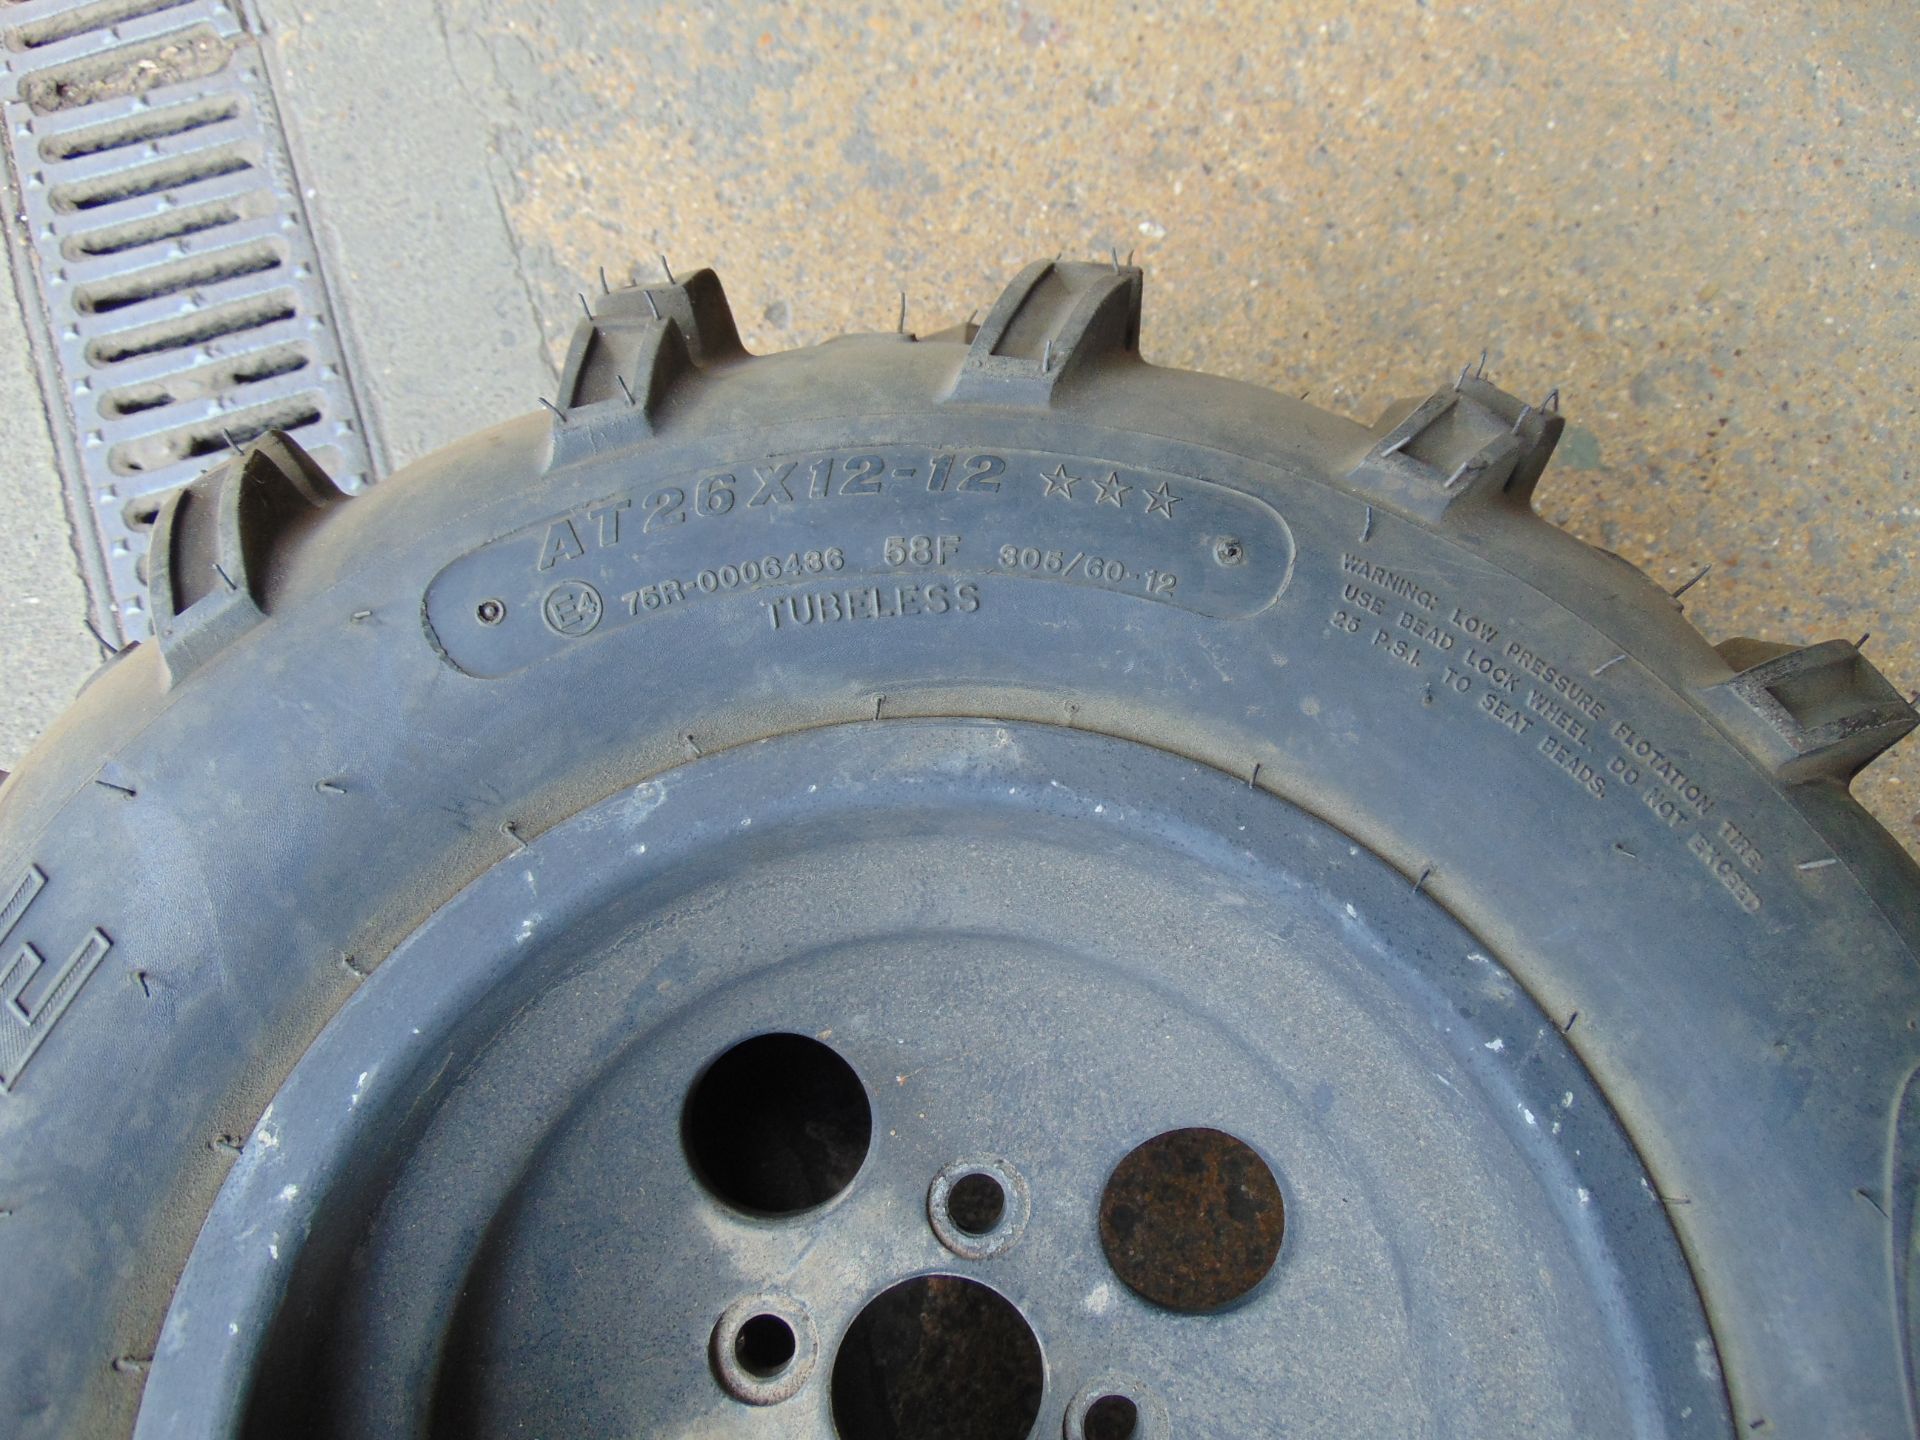 New Unissued RTV Spare Wheel and Tyre, Mud Lite AT 26x12-12 - Image 5 of 5